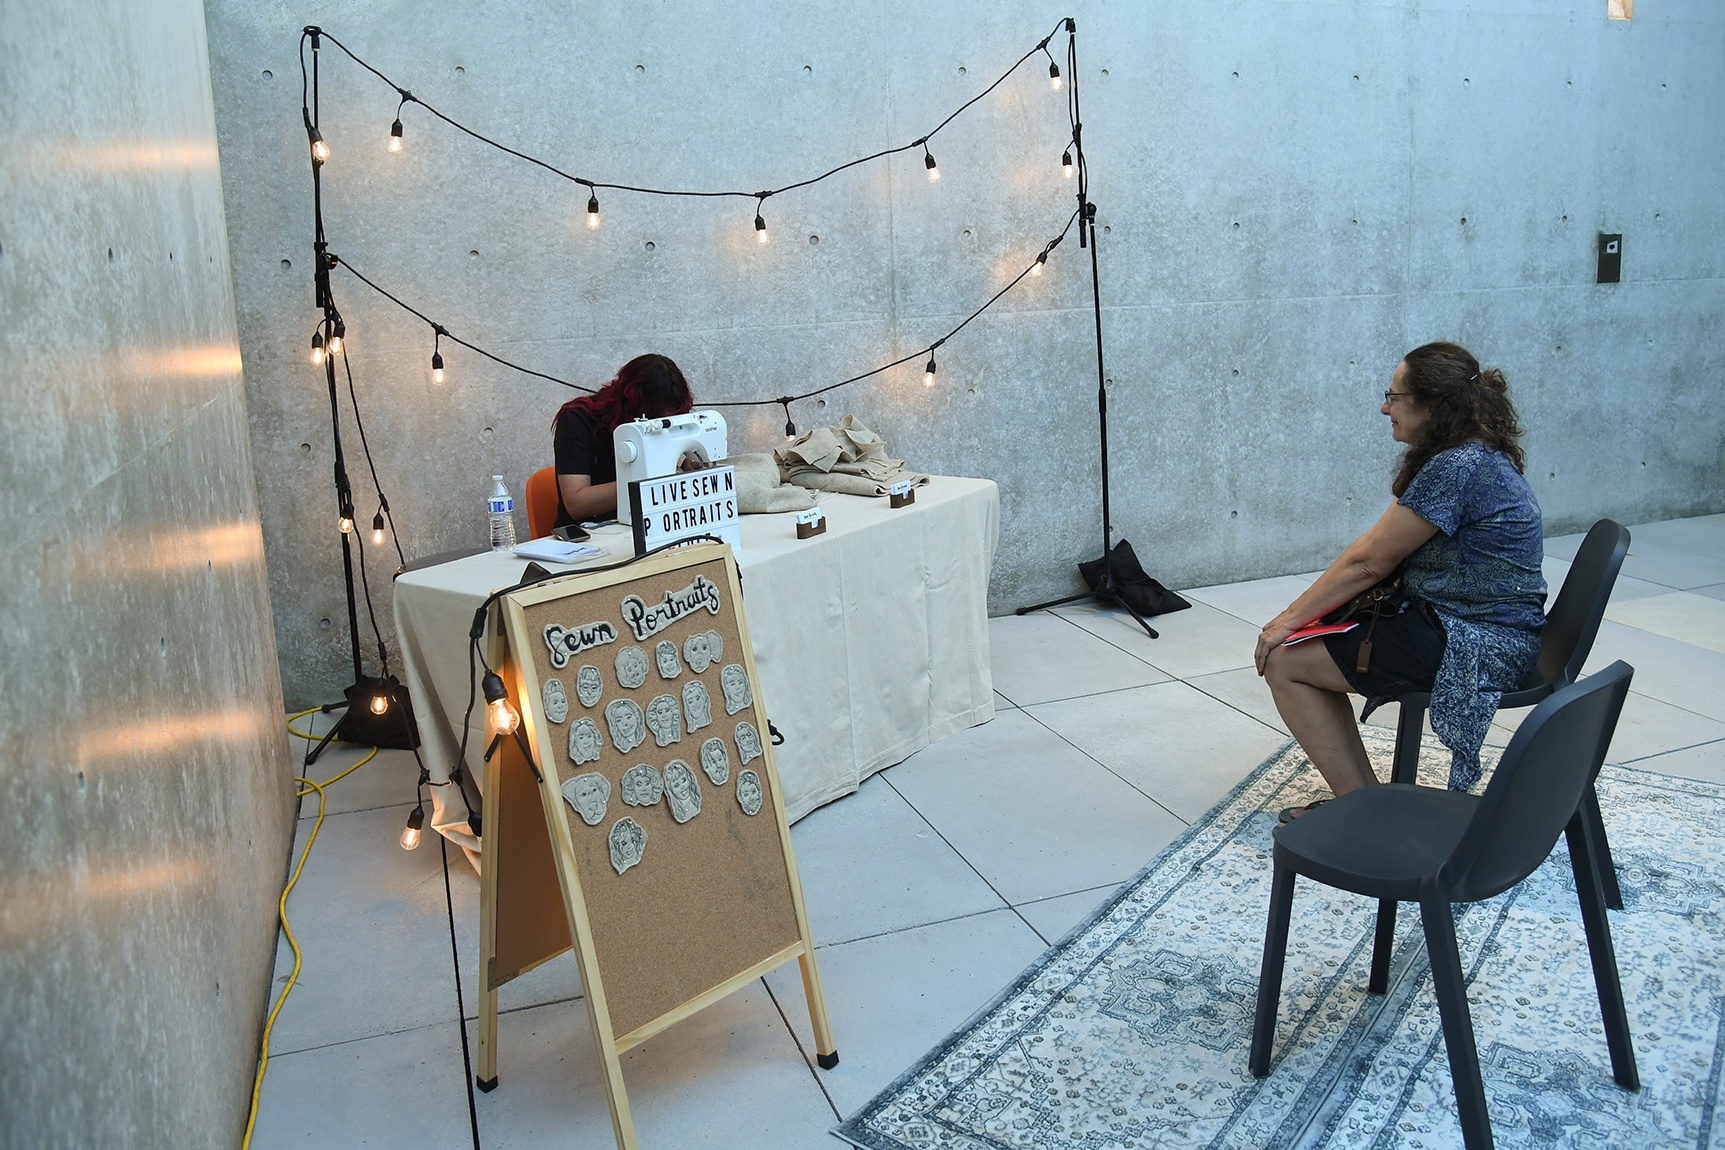 Artist Tucker Pierce working at a sewing machine, a seated visitor, and a corkboard with several sewn portrait examples